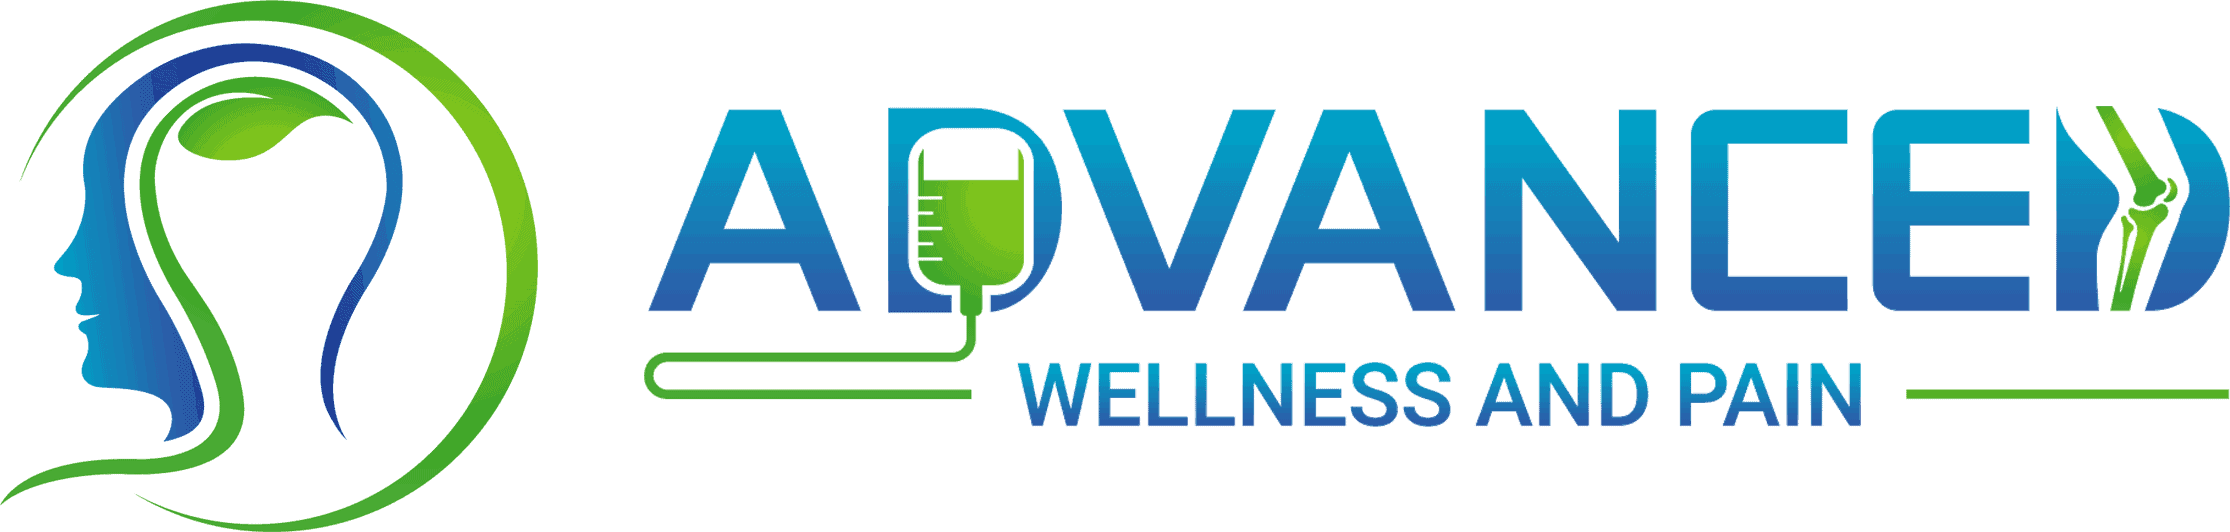 Advanced Wellness and Pain LOGO.png